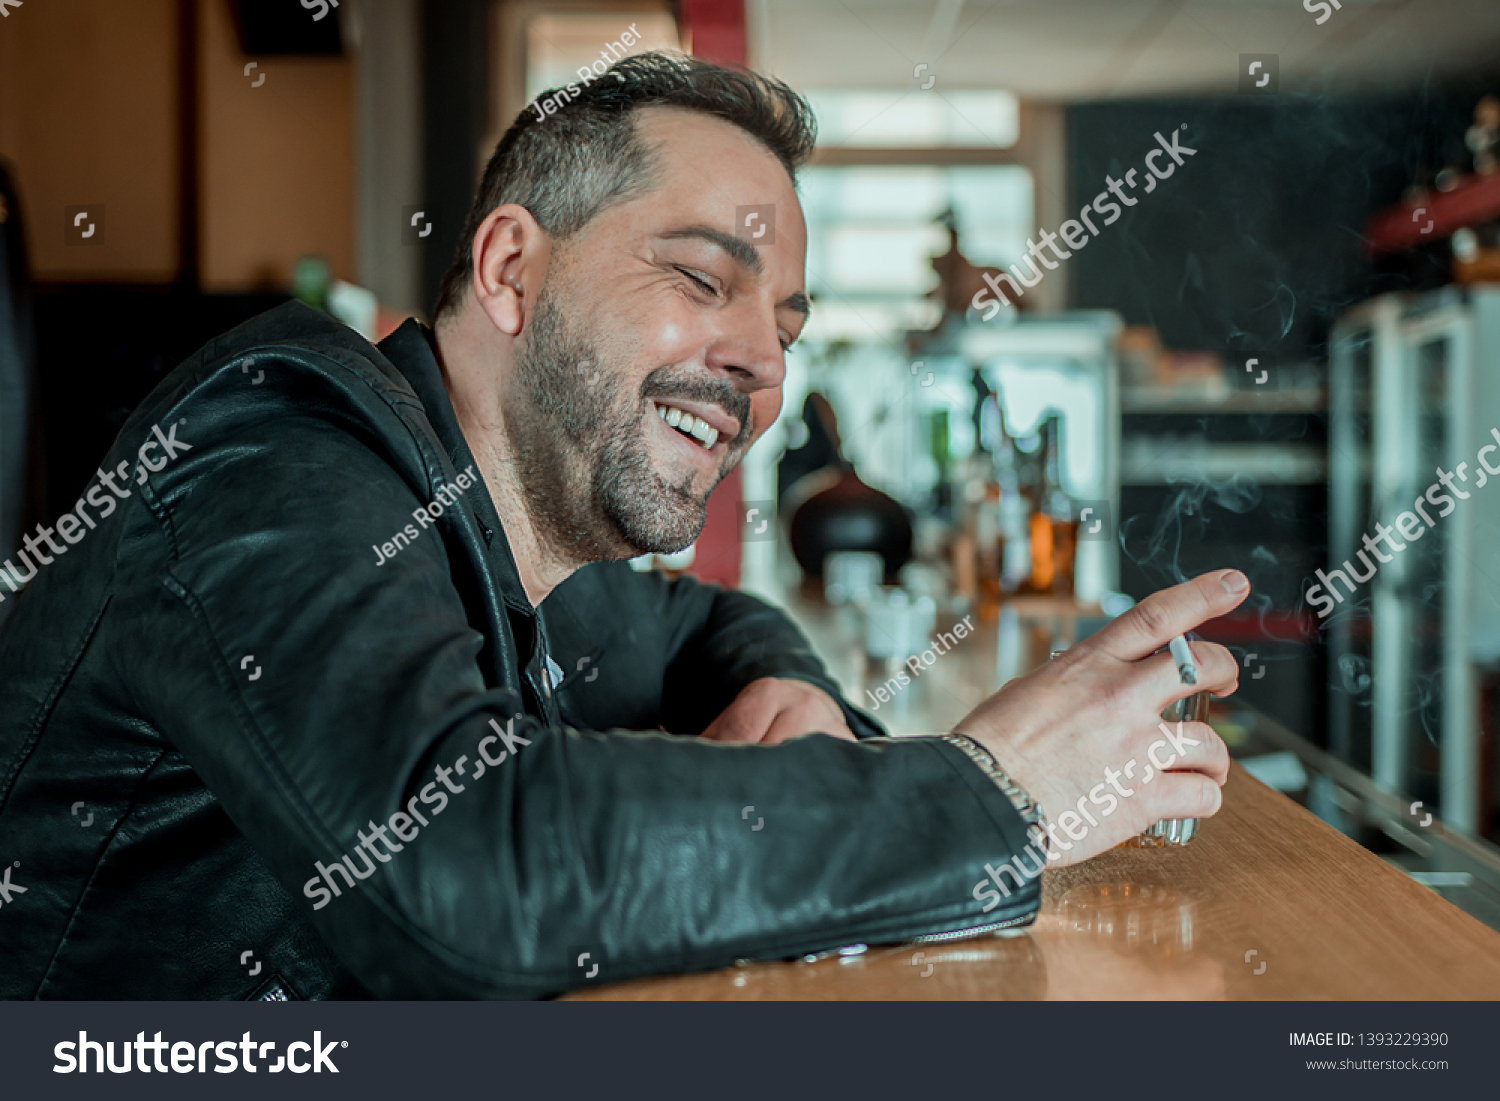 Laughing Man Bar Counter Whiskey Cigarette Stock Photo 1393229390 ...